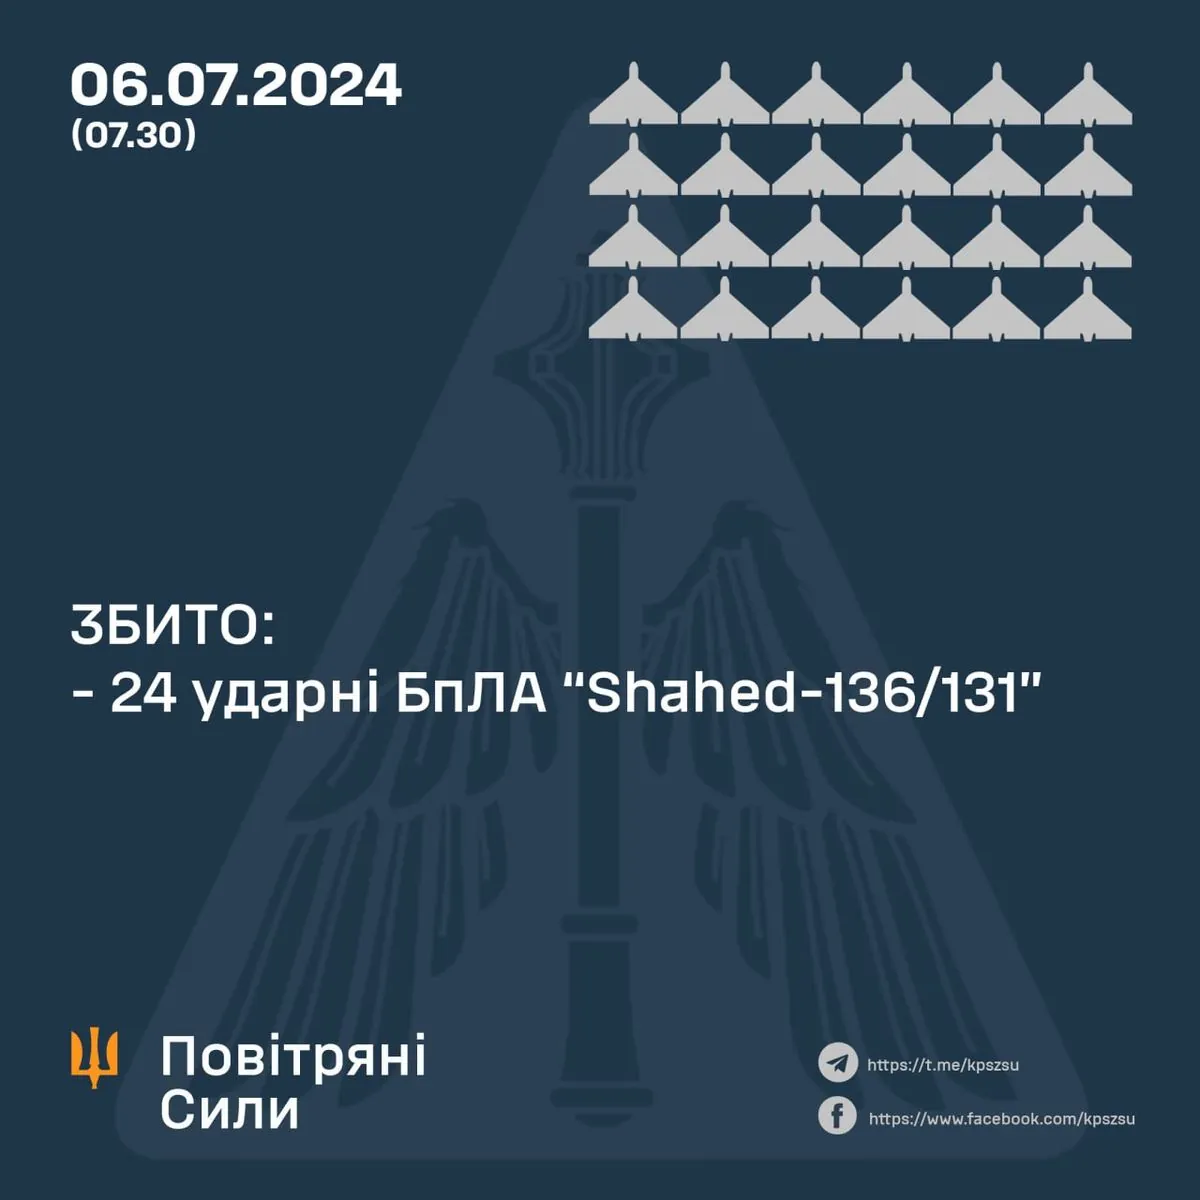 On the night of July 6, Ukrainian air defense destroyed 24 out of 27 enemy UAVs of the "Shahed-131/136" type